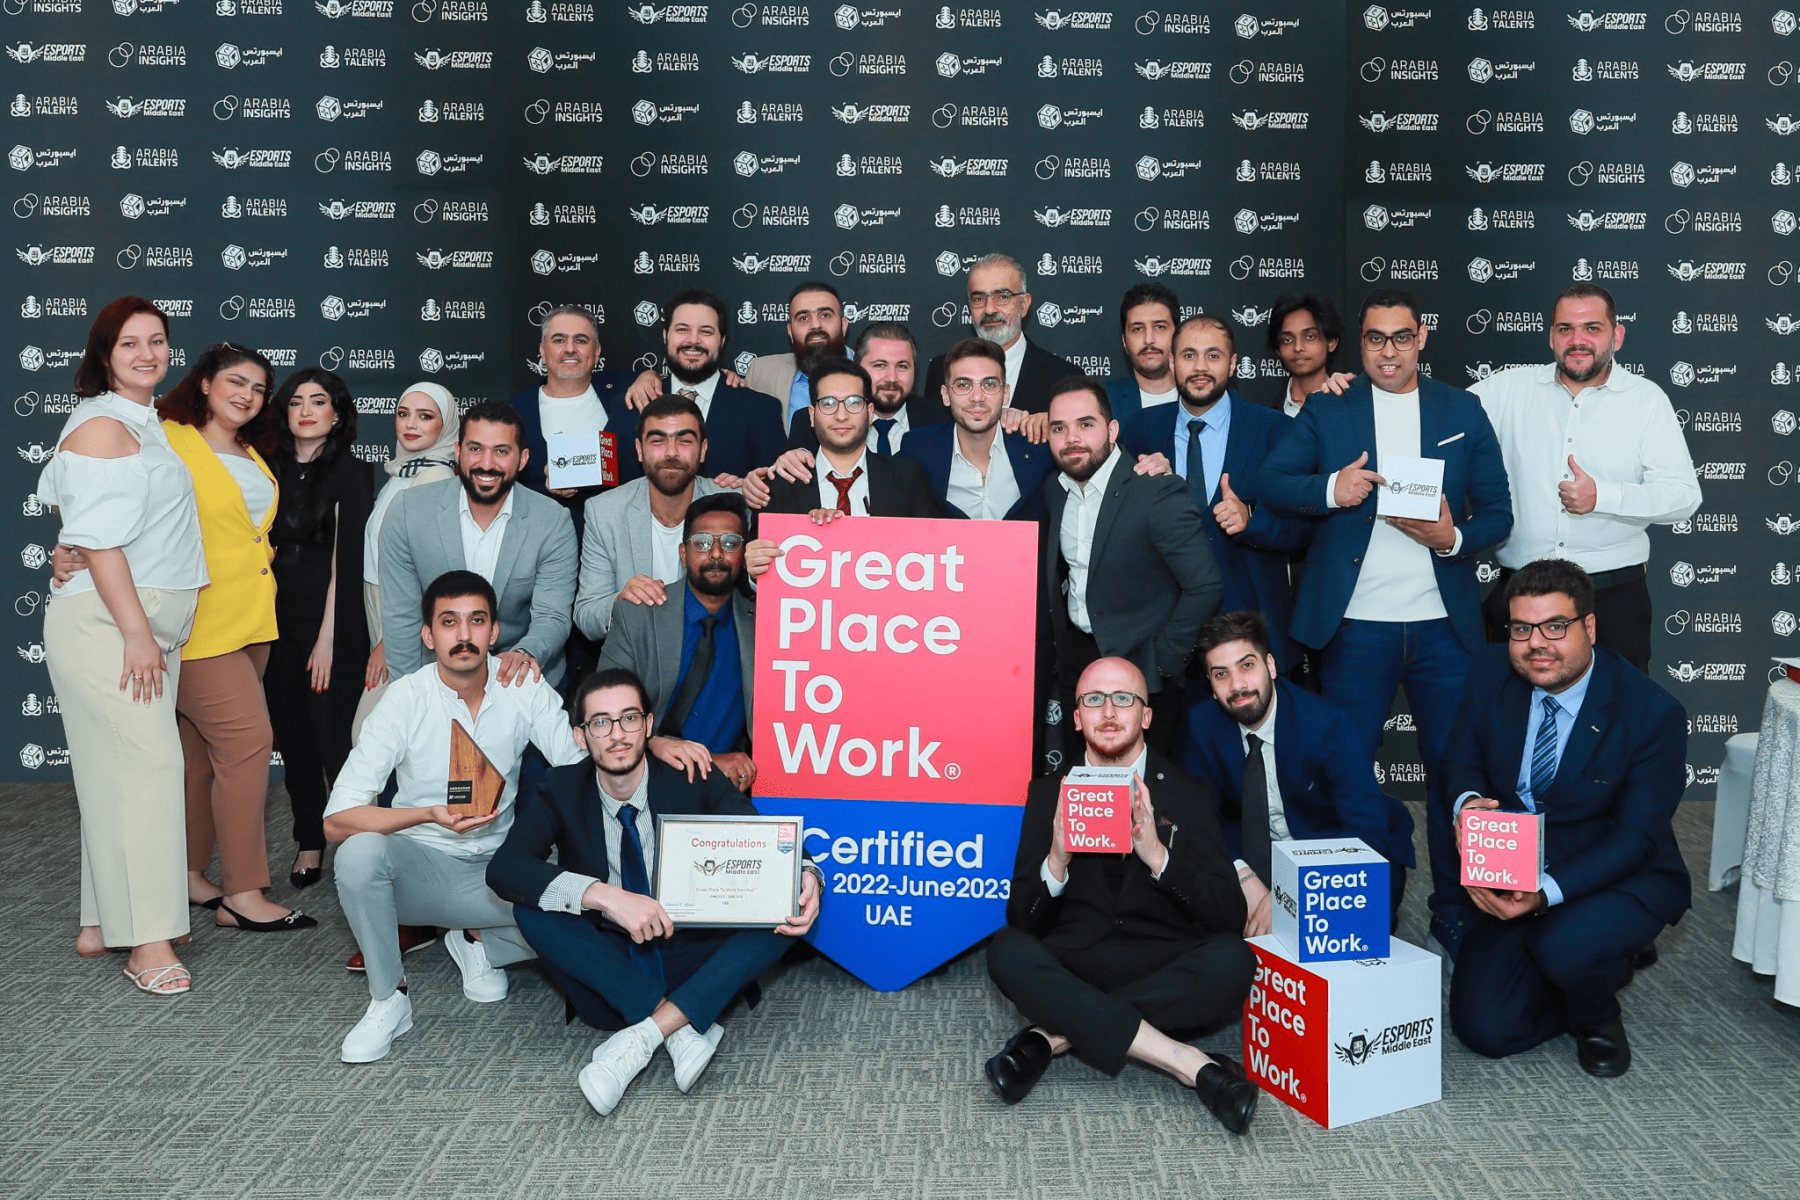 Esports Middle East awarded certification by Great Place to Work